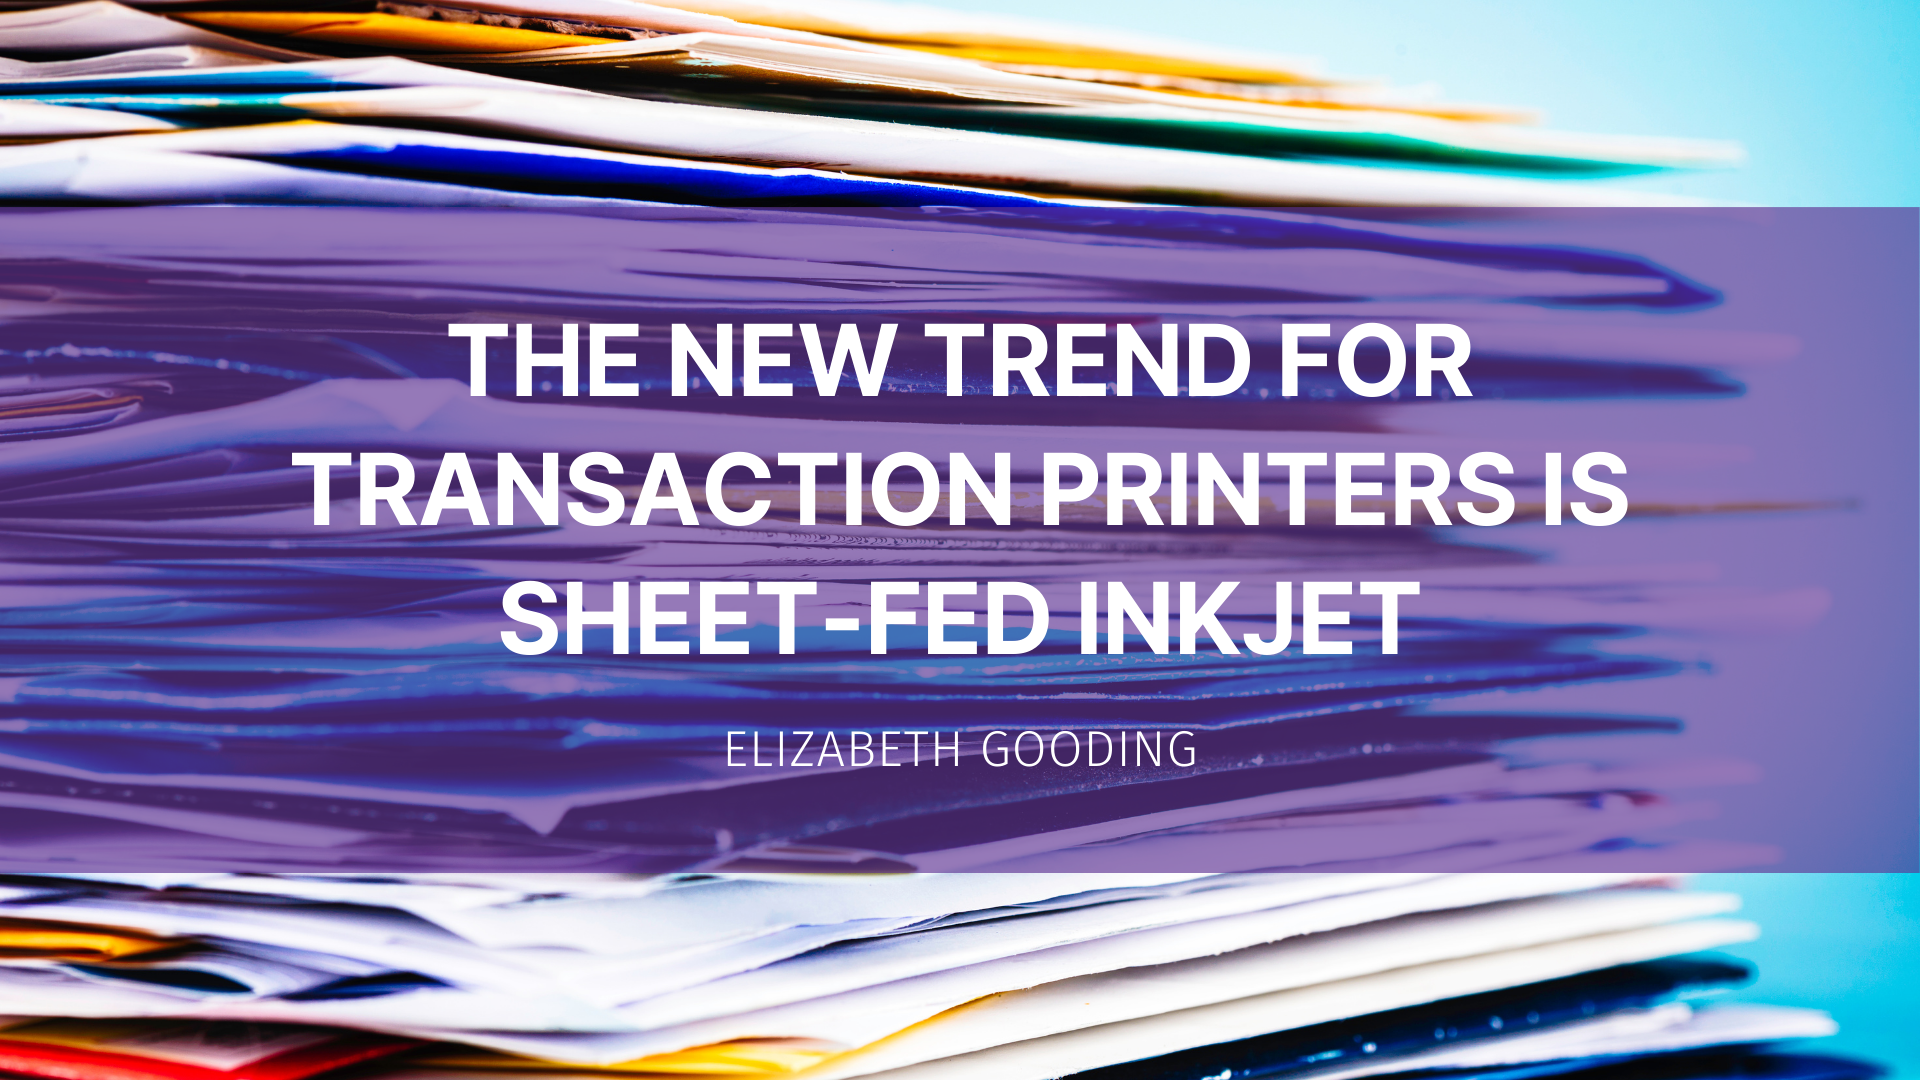 Featured image for “The new trend for transaction printers is sheet-fed inkjet”